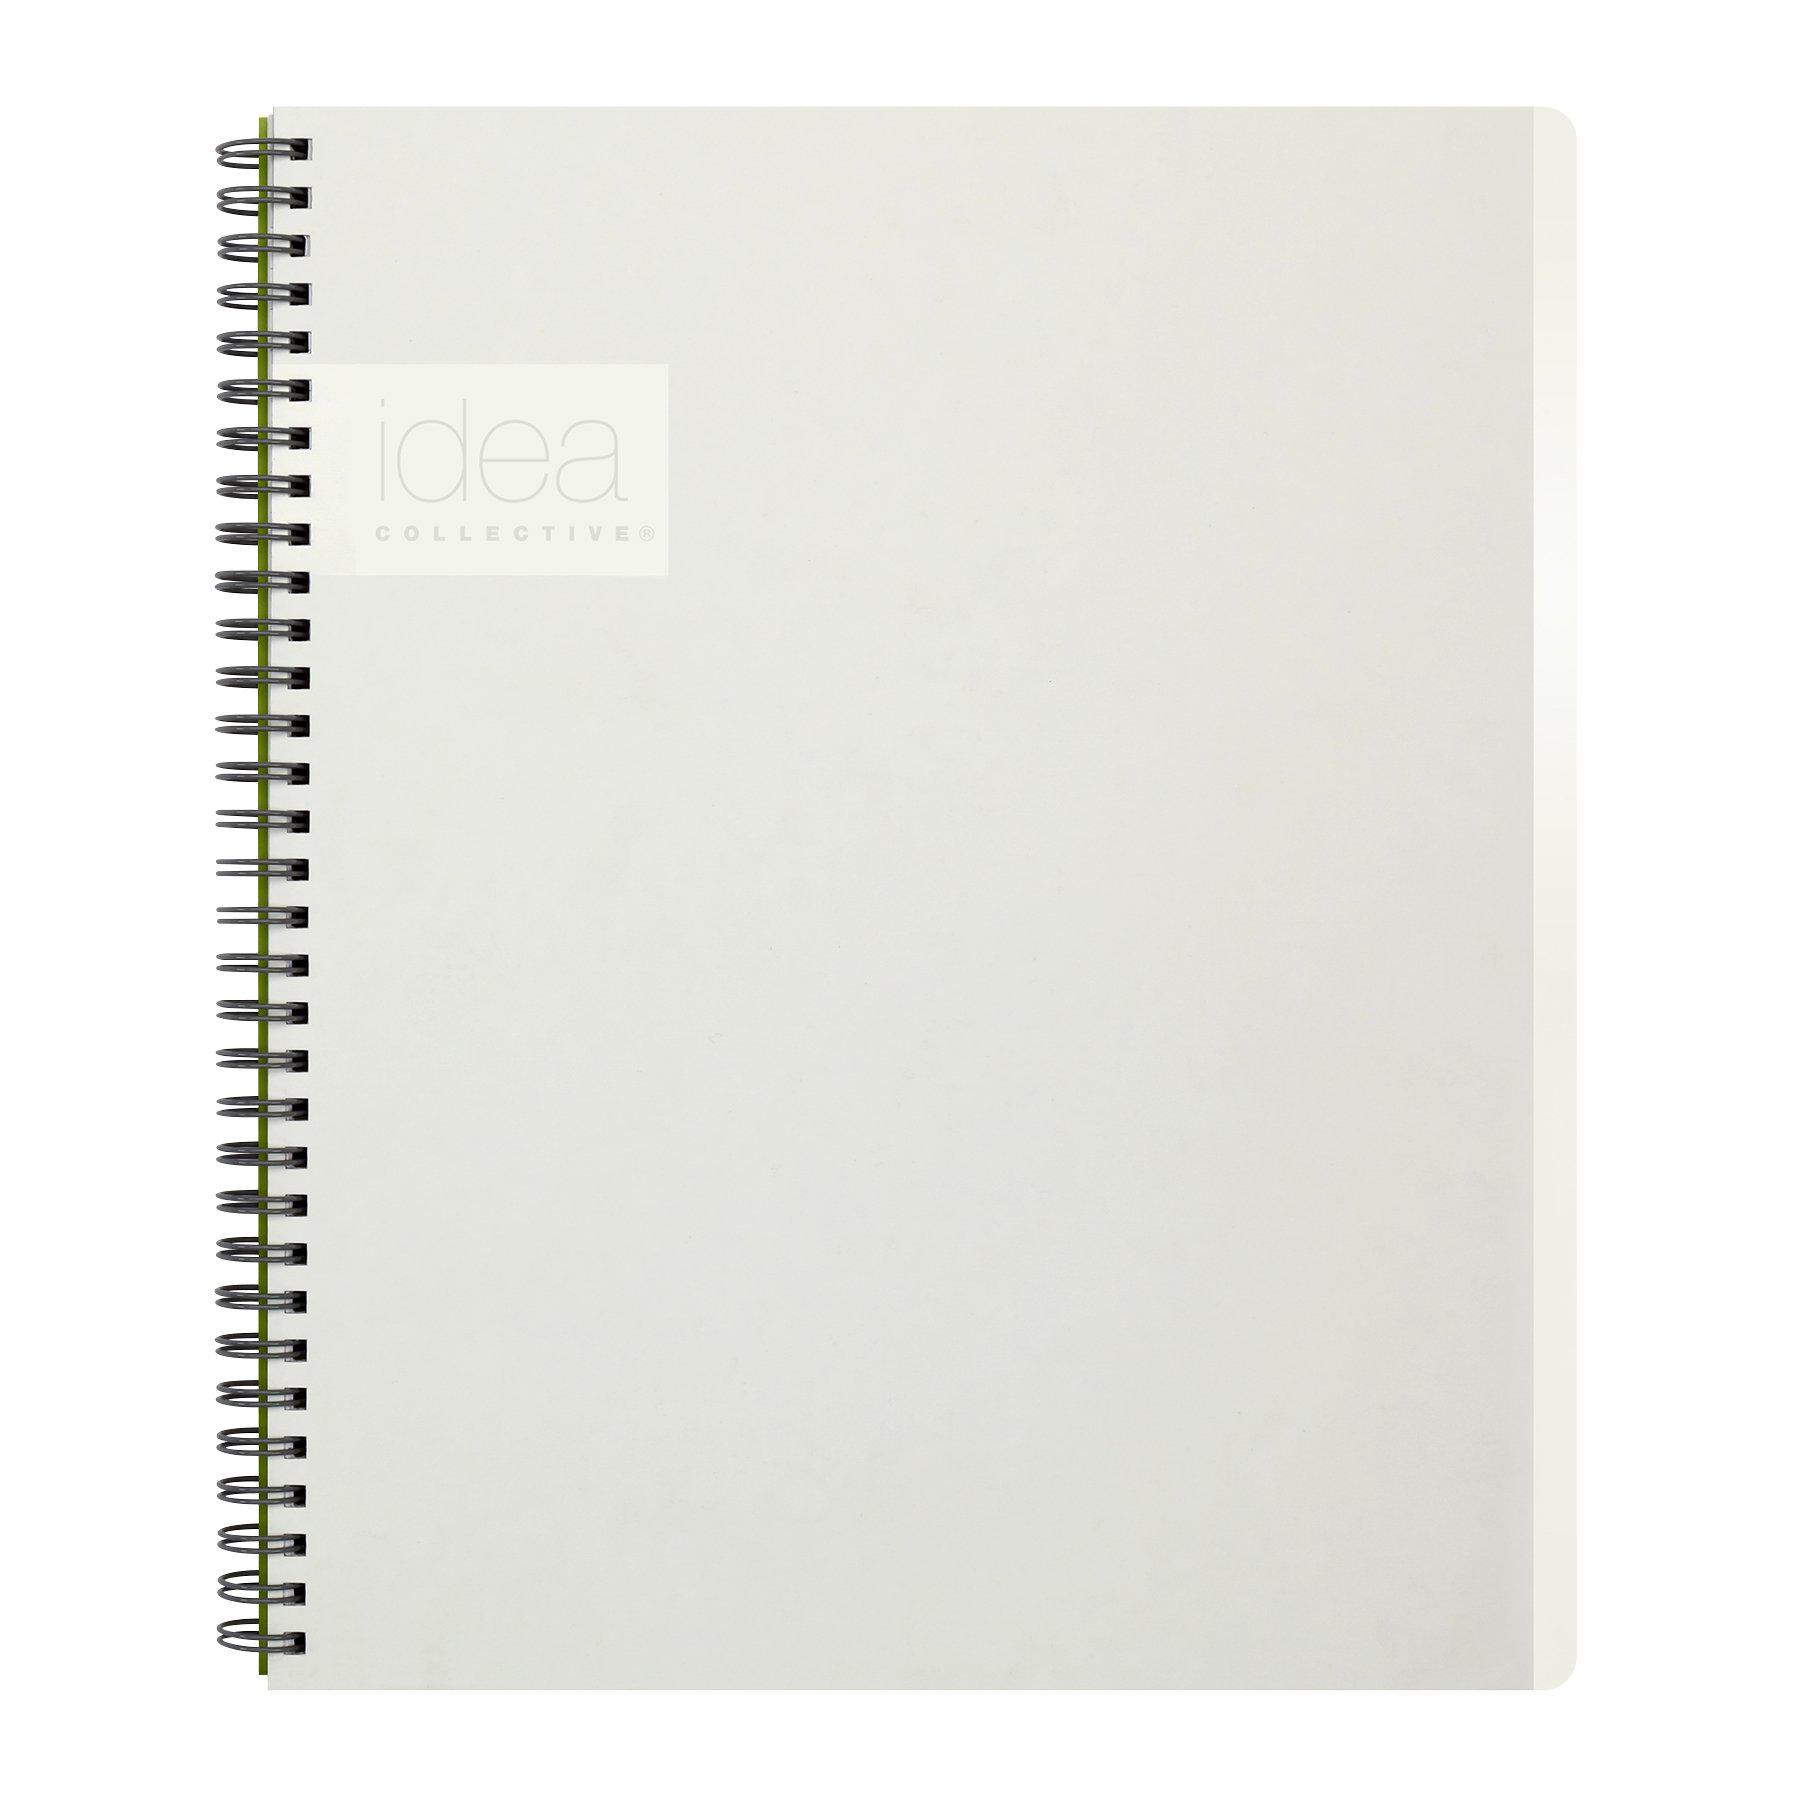 oxford idea collective action notebook, double wire-o, 11 x 8 1/4, ruled, 80 sheets, white (57020ic)